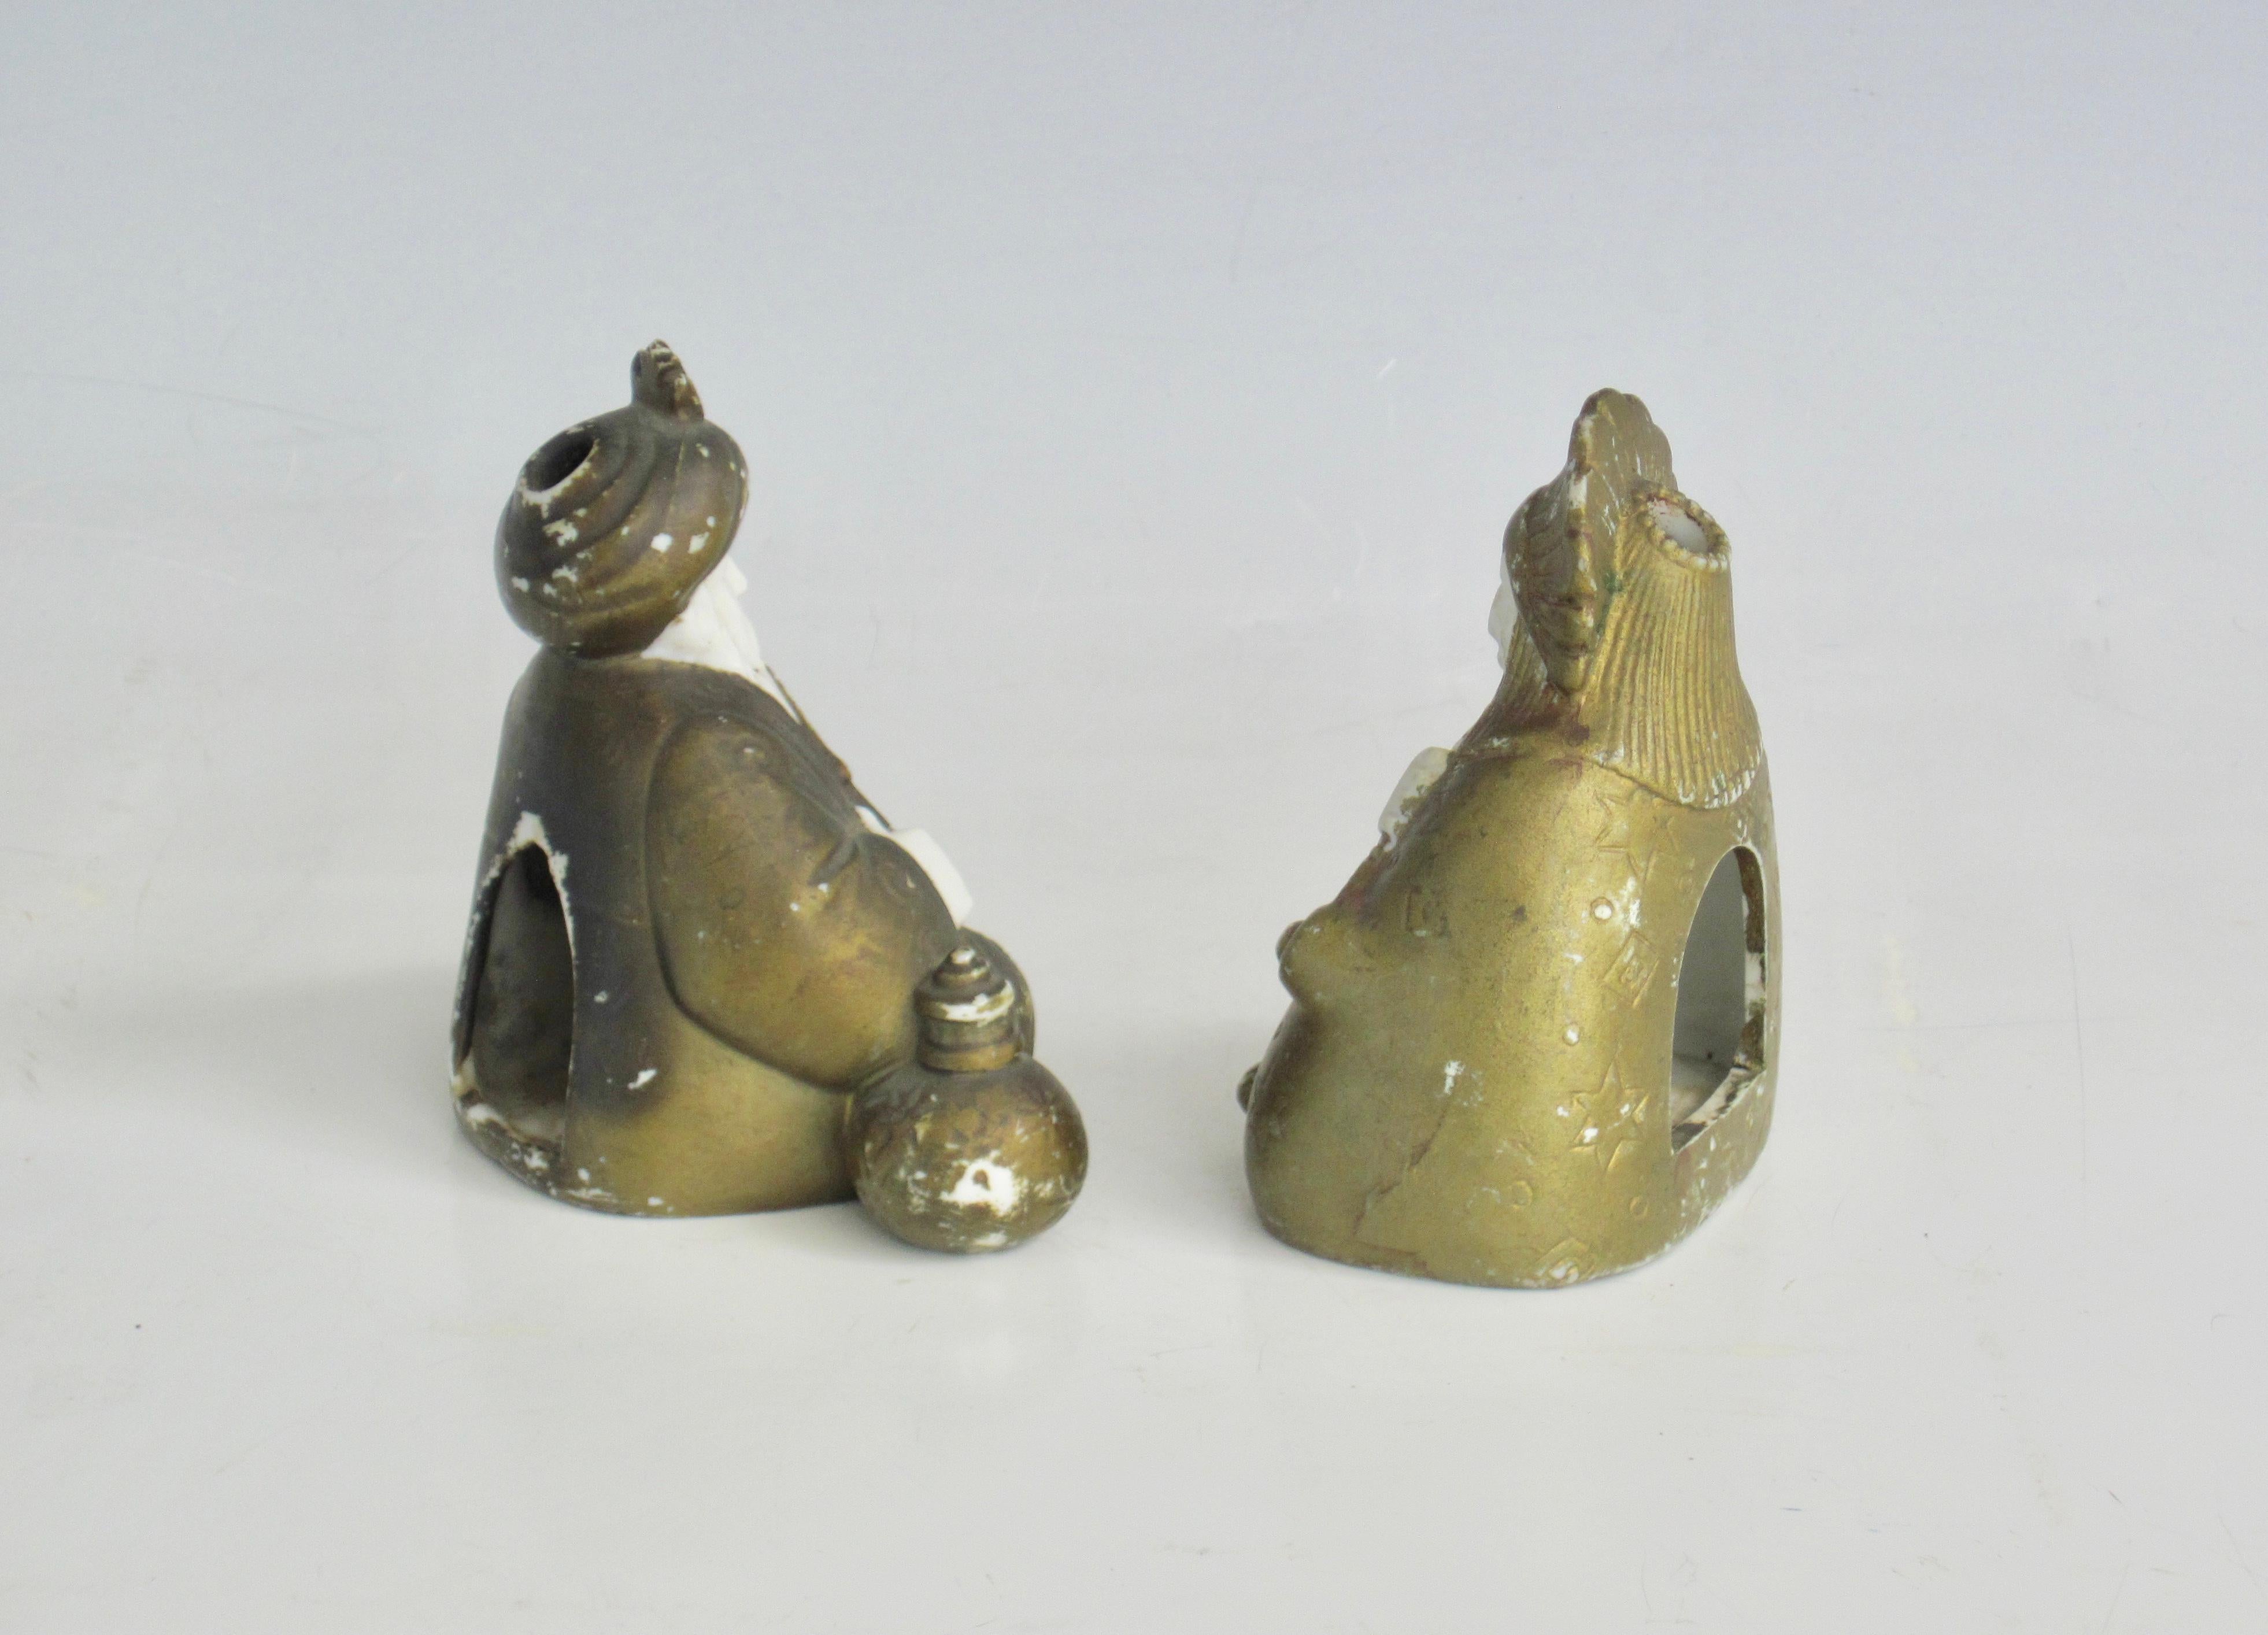 Early 20th Century Japanese Porcelain Incense Burner-Smoker Figurines For Sale 2